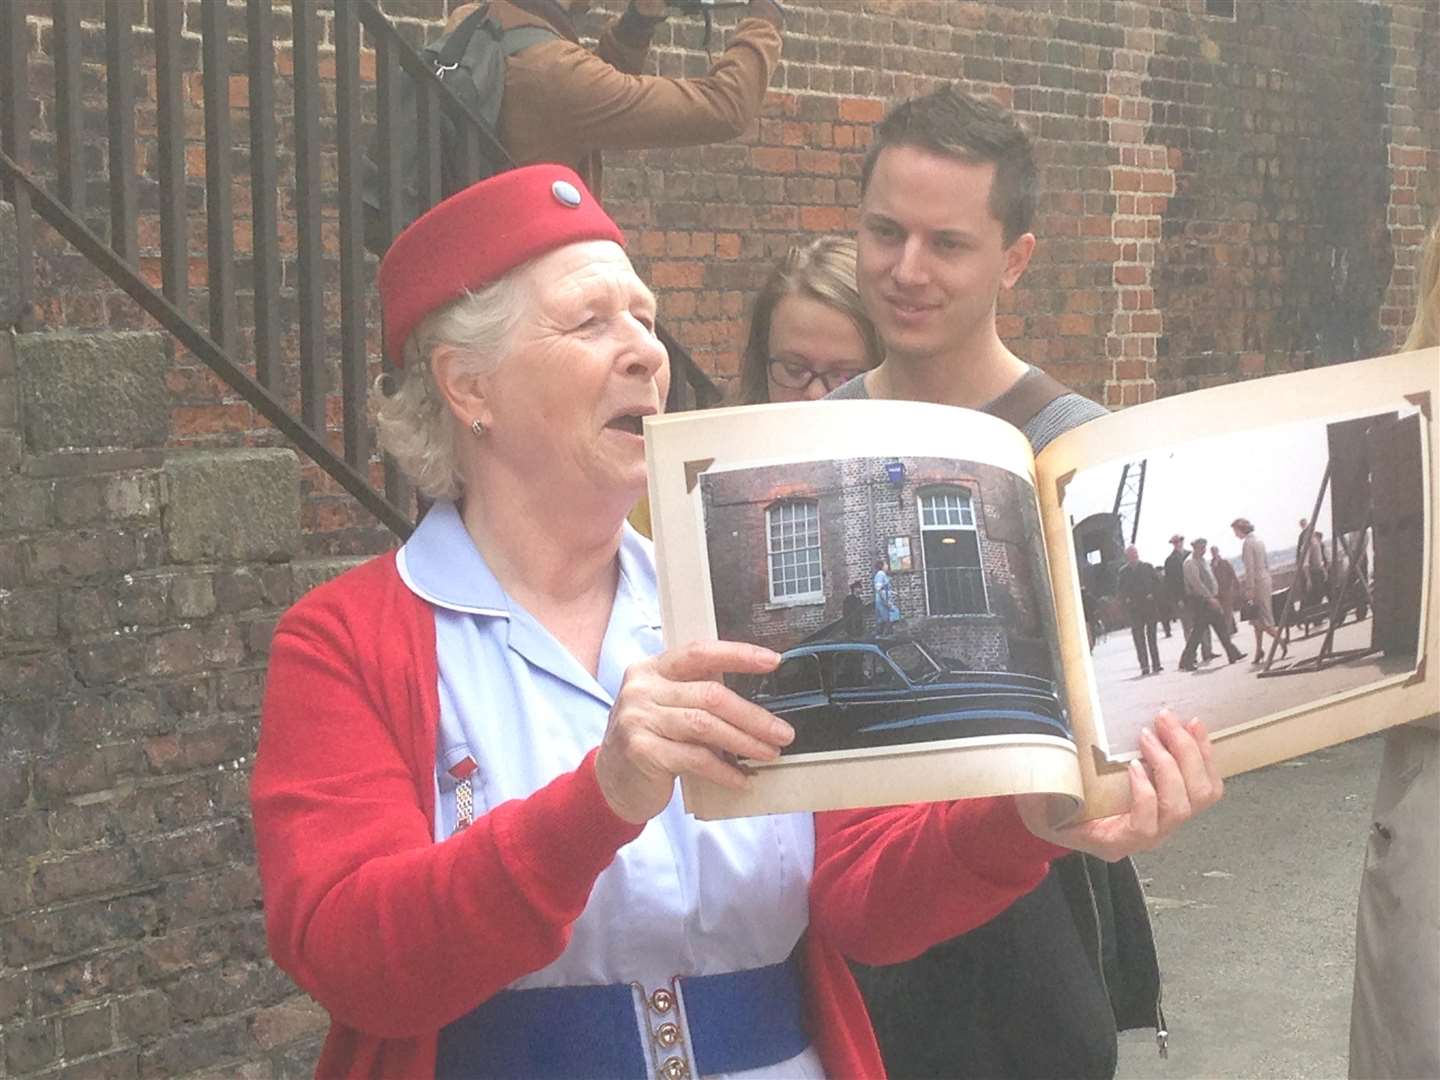 Irene Addley leads a Call the Midwife tour